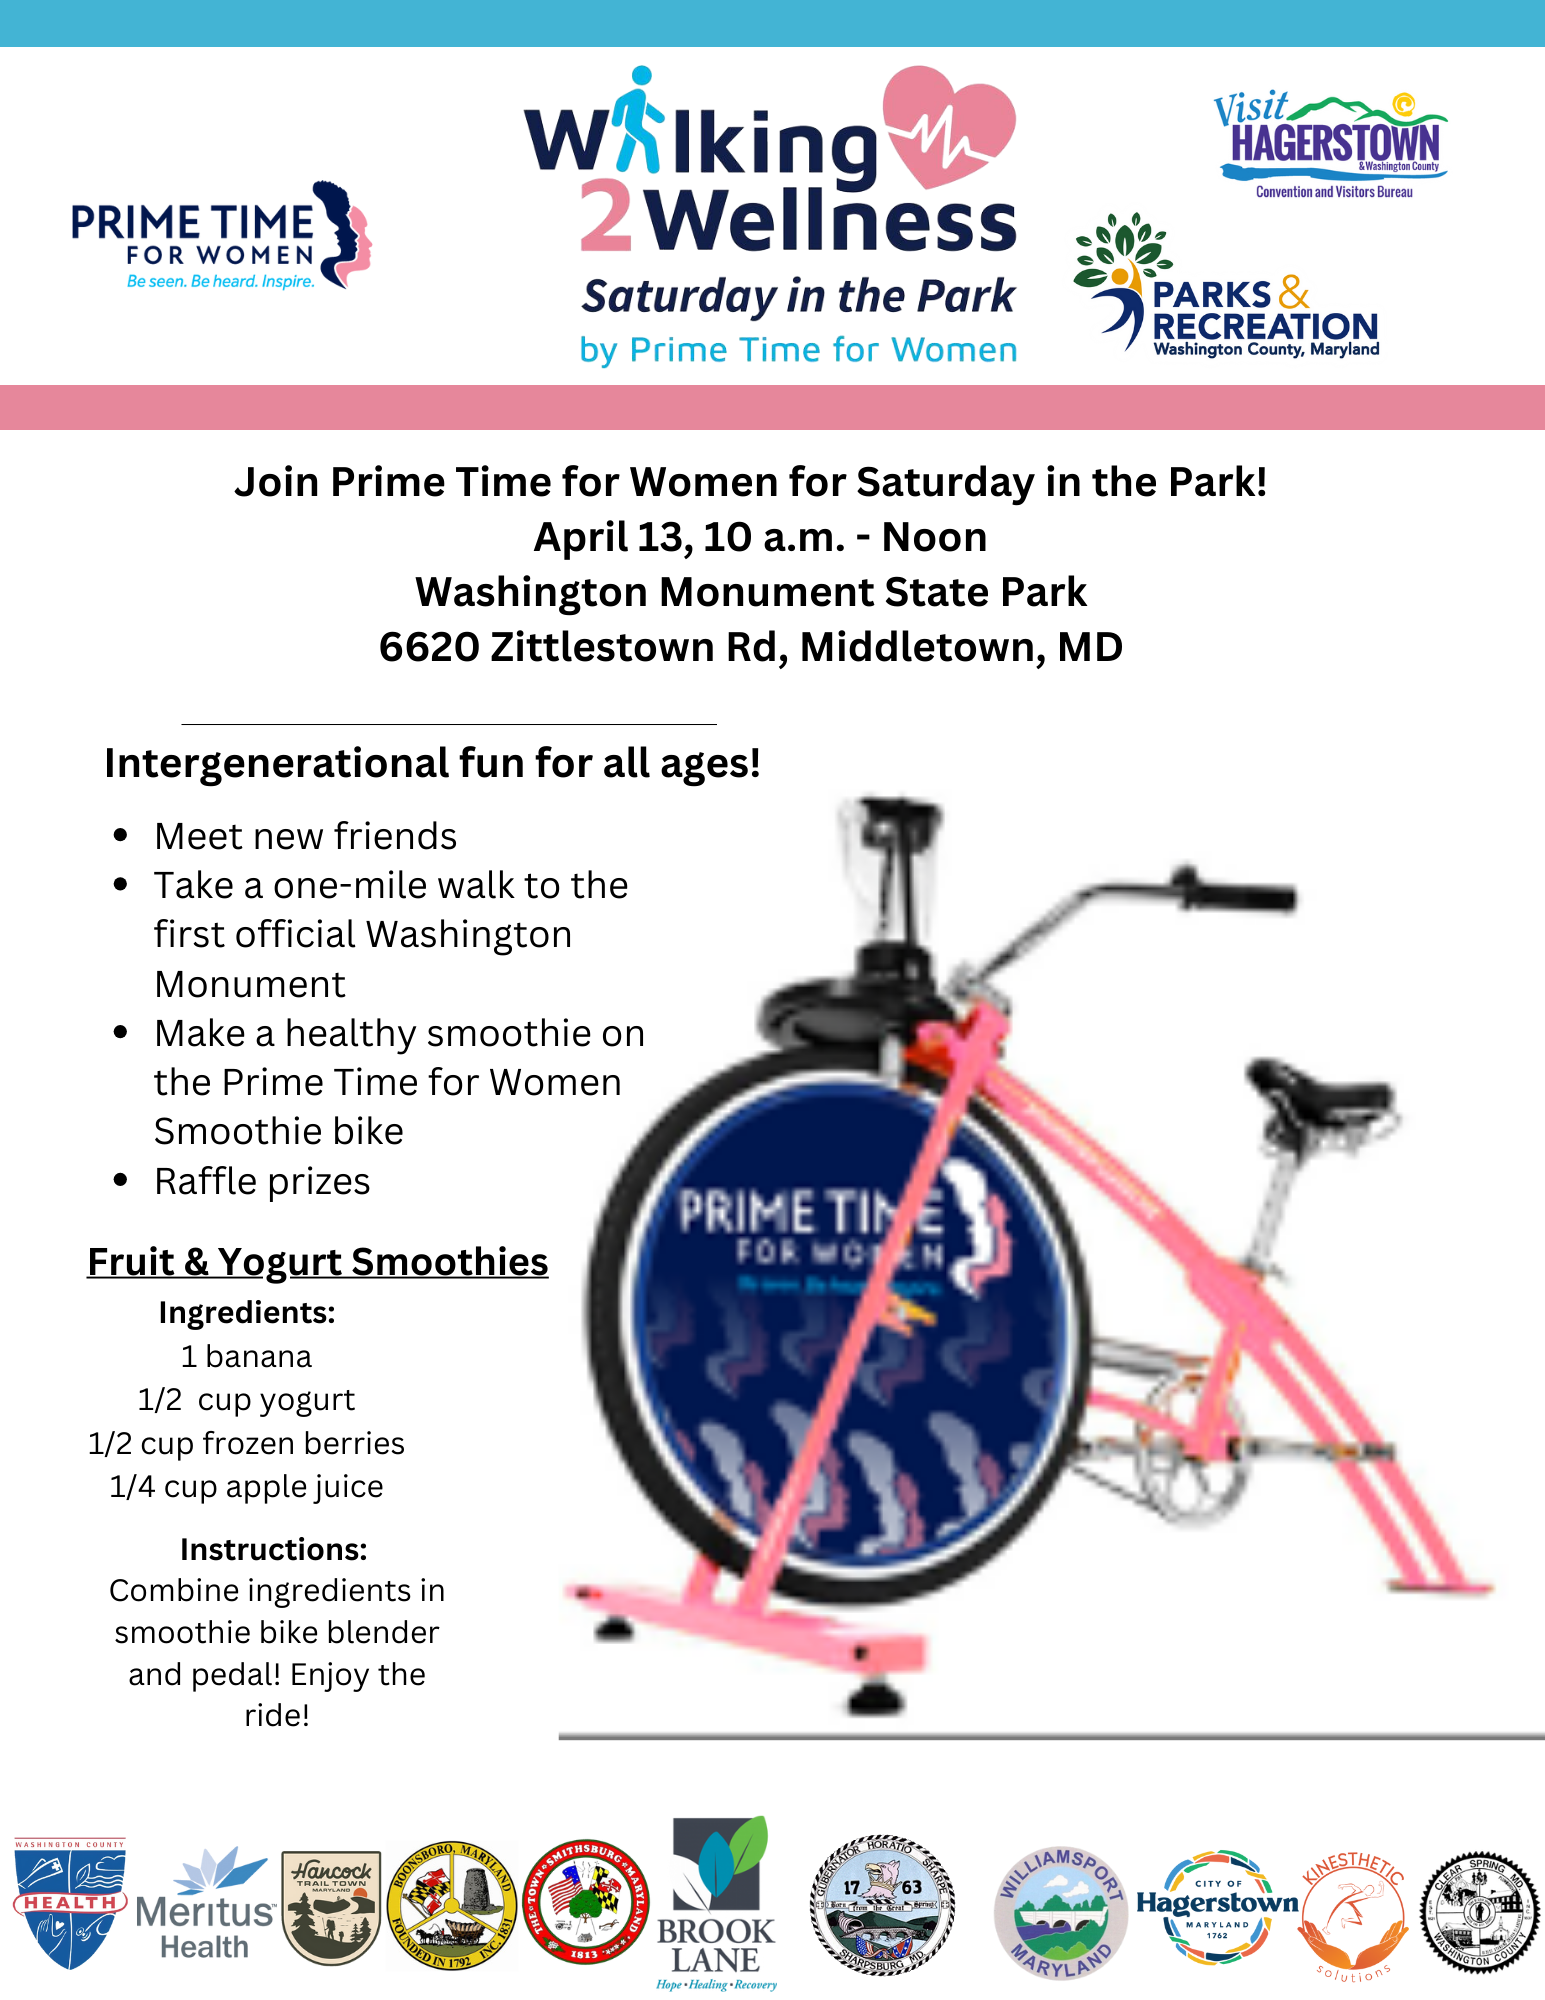 Image: White box with illustration of smoothie bike; logos for main sponsor: Prime Time for Women and multiple additional sponsors; Text: April 13, 10 a.m.-Noon, Washington Monument St. Park, Middletown; list of activities taking place; fruit and yogurt smoothie recipe included.